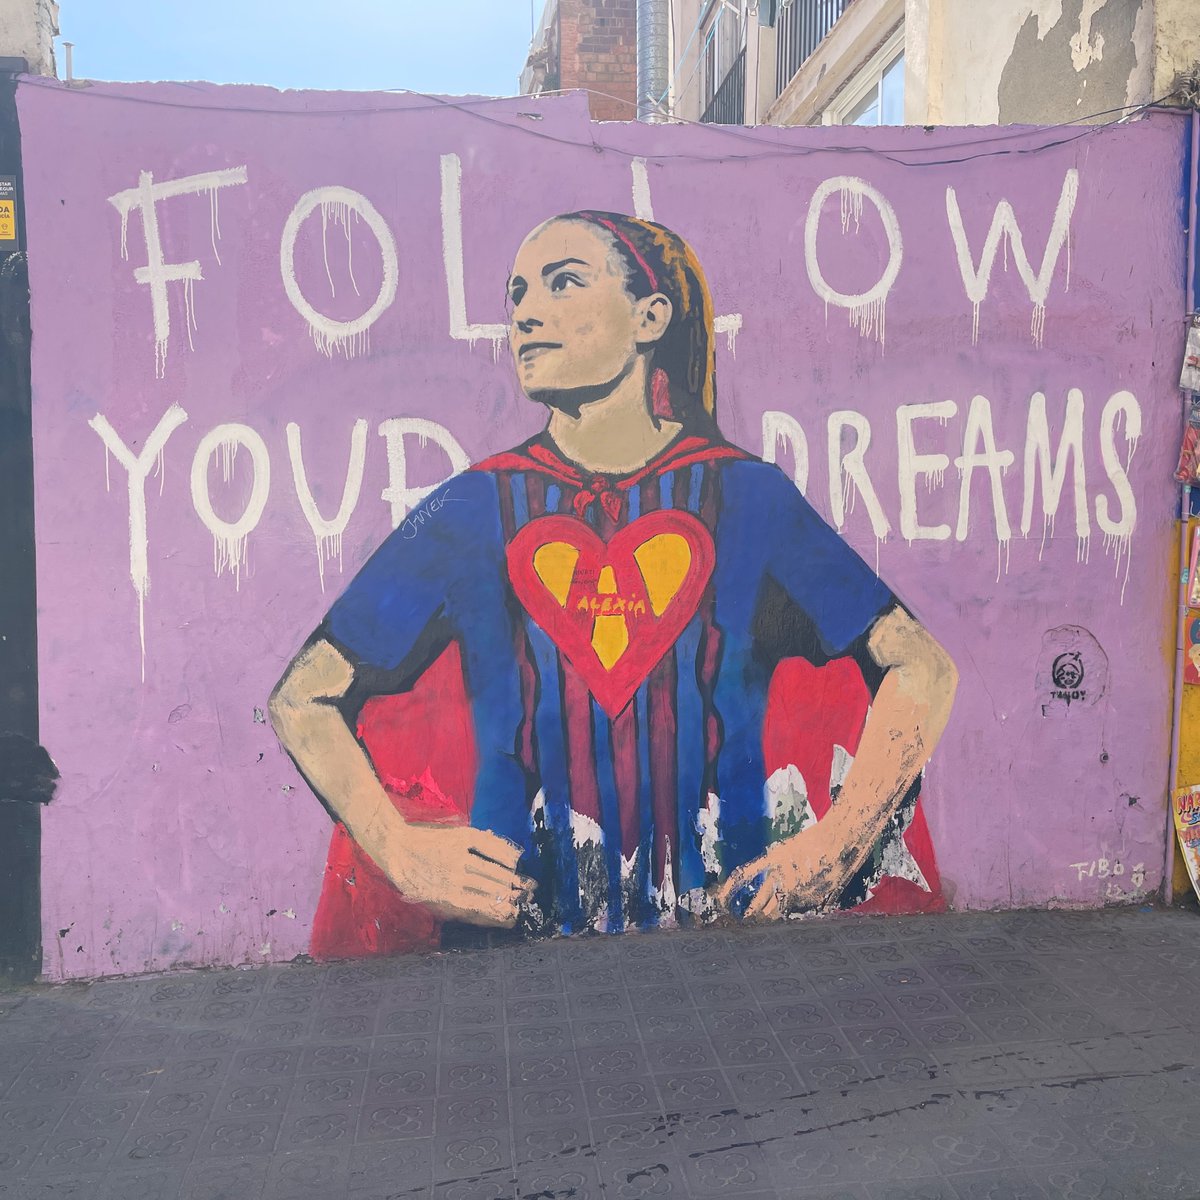 Came across this mural of Alexia Putellas for the first time today. Kinda fitting ahead of tonight’s Women’s Champions League knockout match at the Camp Nou.